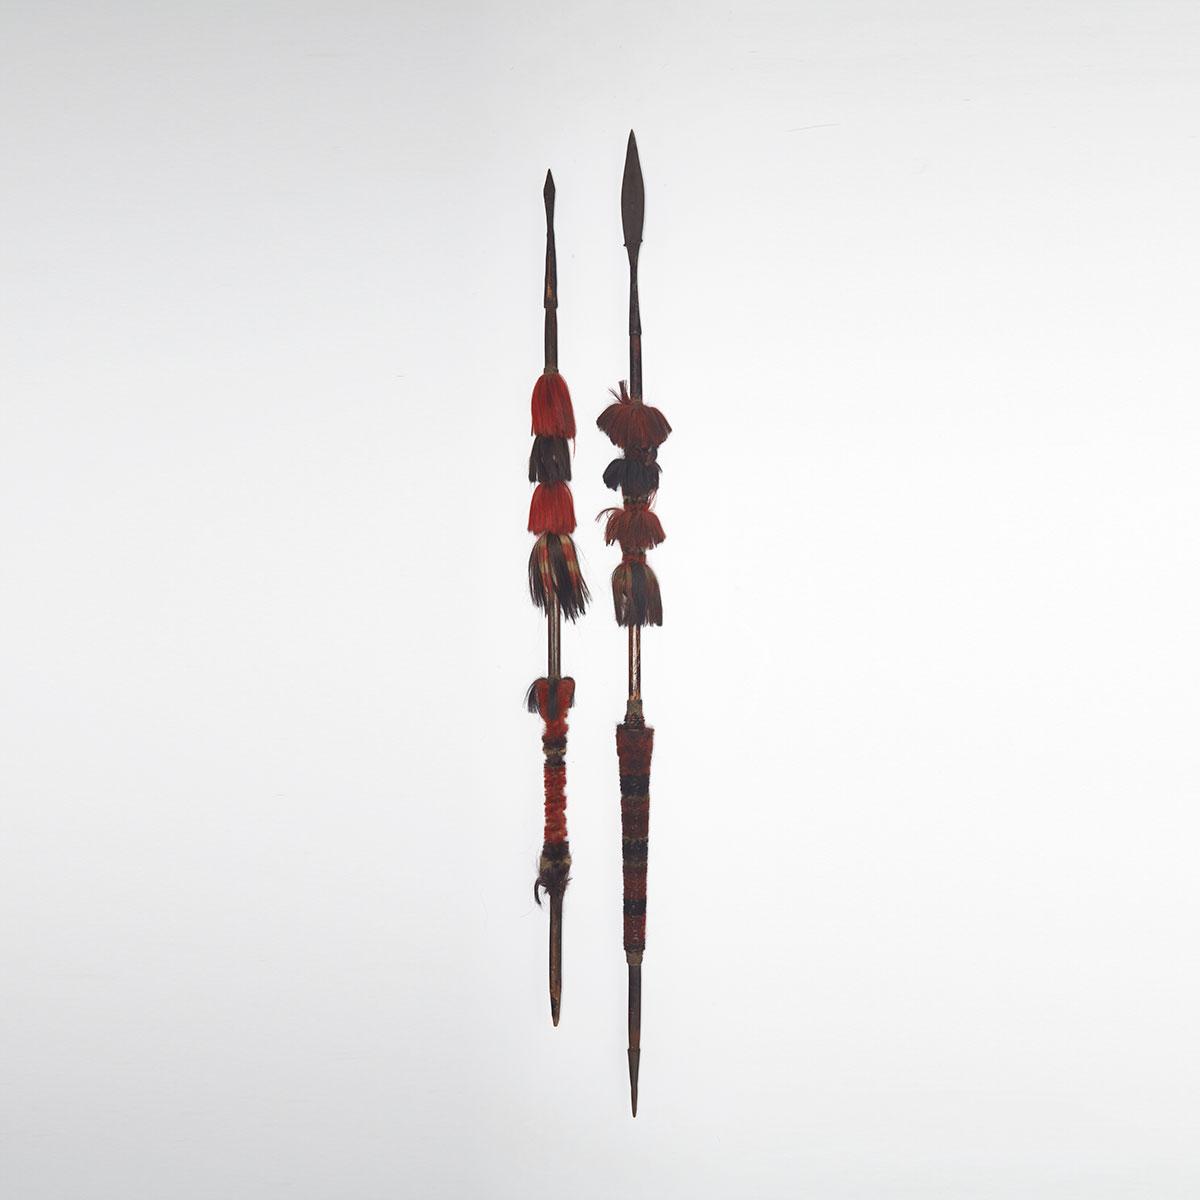 Two Nagaland Mao or Konyak Spears, 19th/20th century